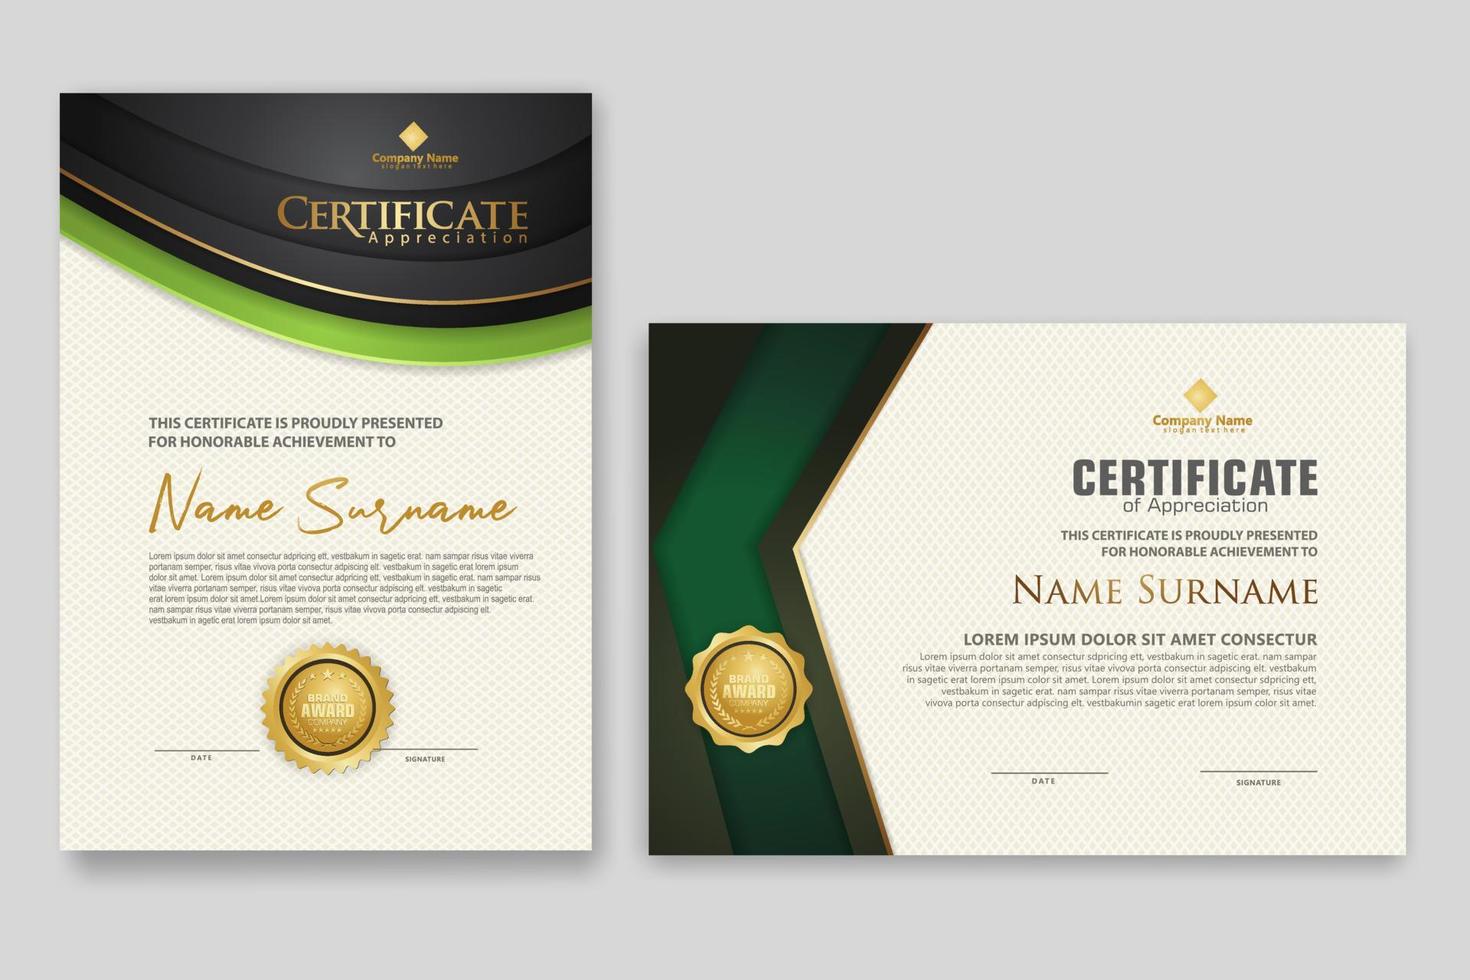 Certificate template with luxury badge and elegance modern pattern background. for appreciation, achievements, award, business, and education needs. vector illustration